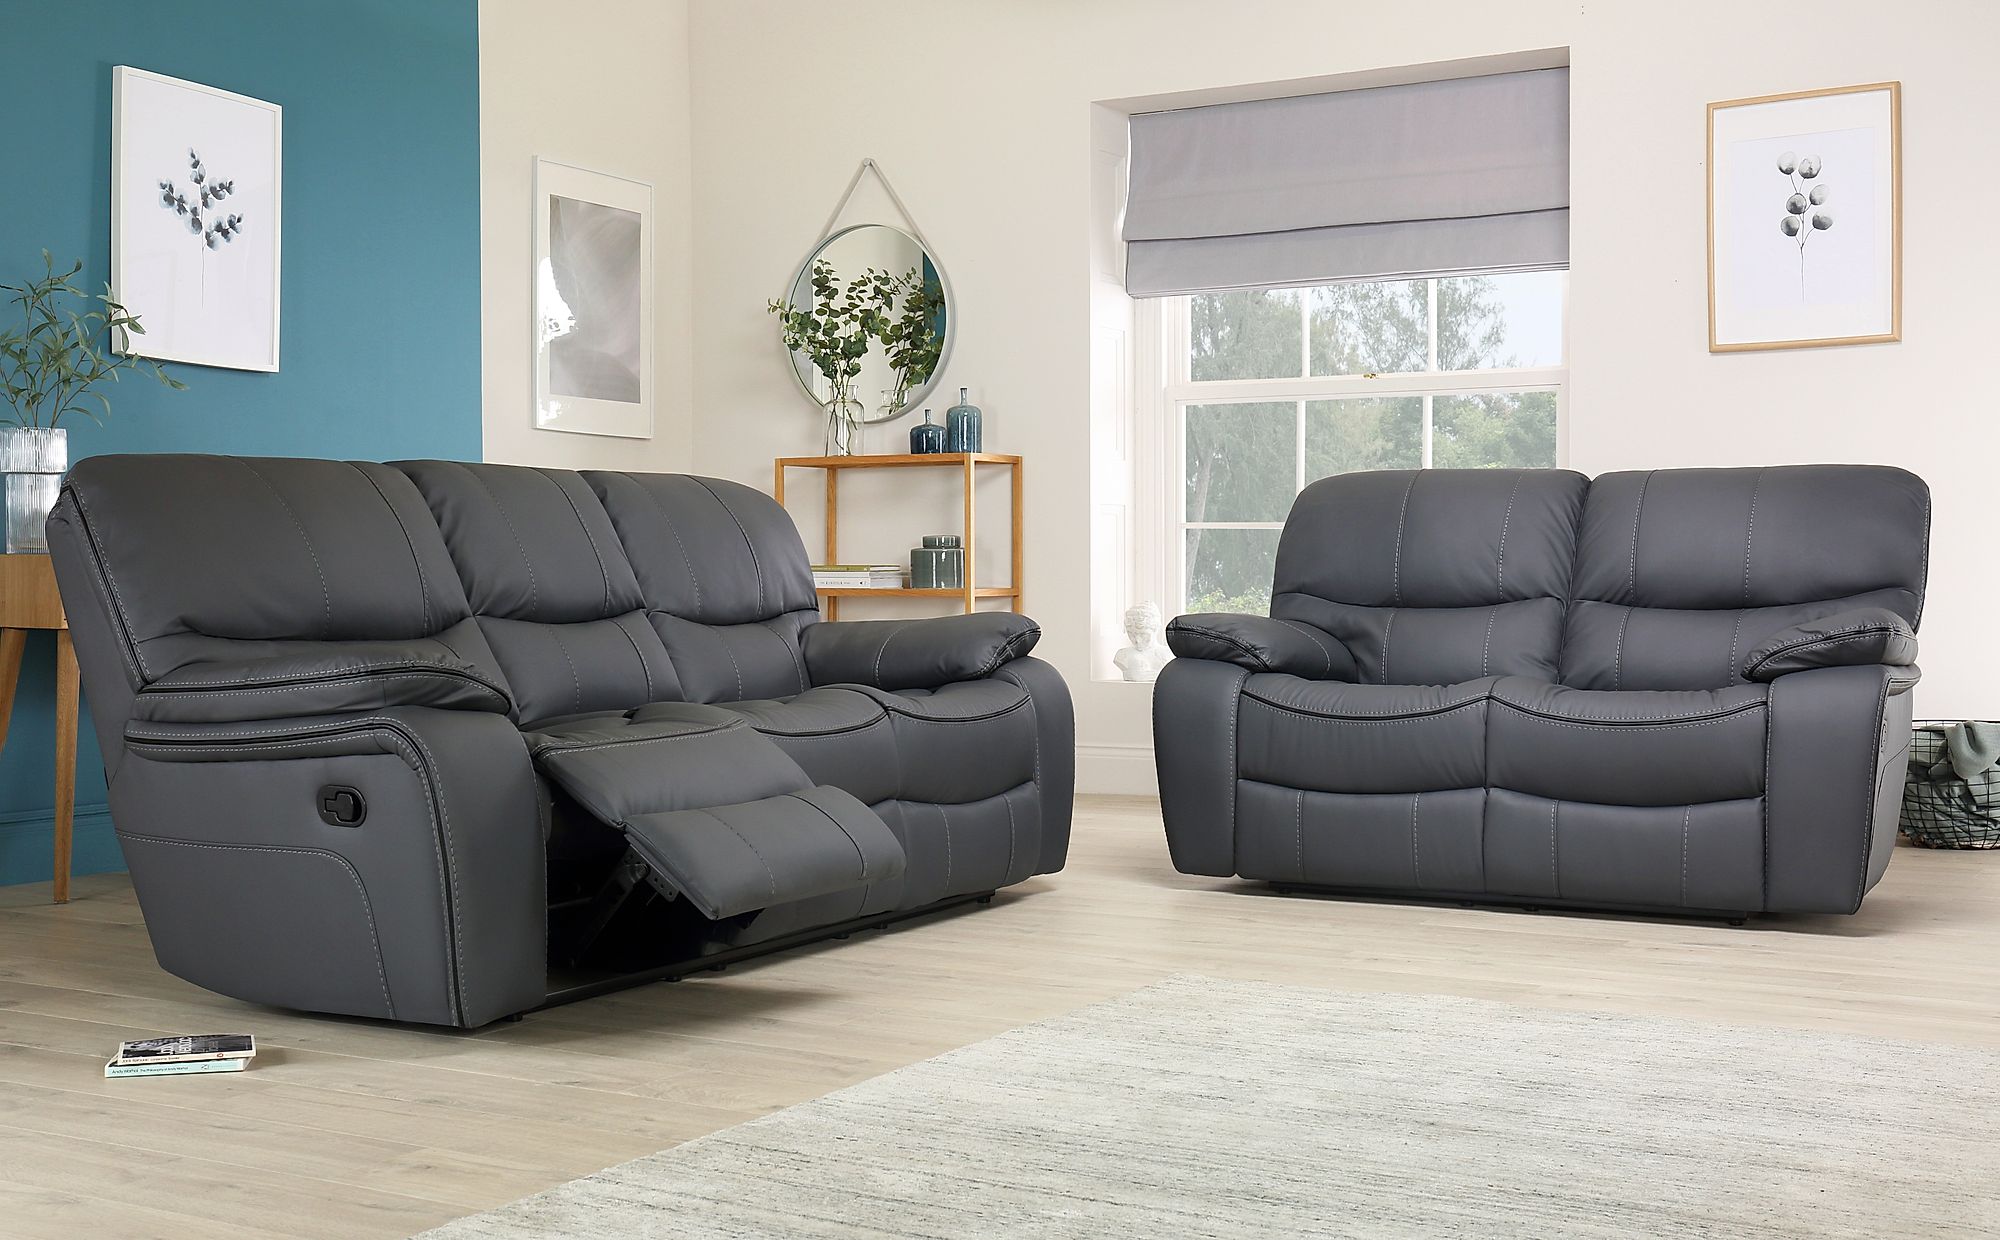 Beaumont Grey Leather 3+2 Seater Recliner Sofa Set | Furniture Choice